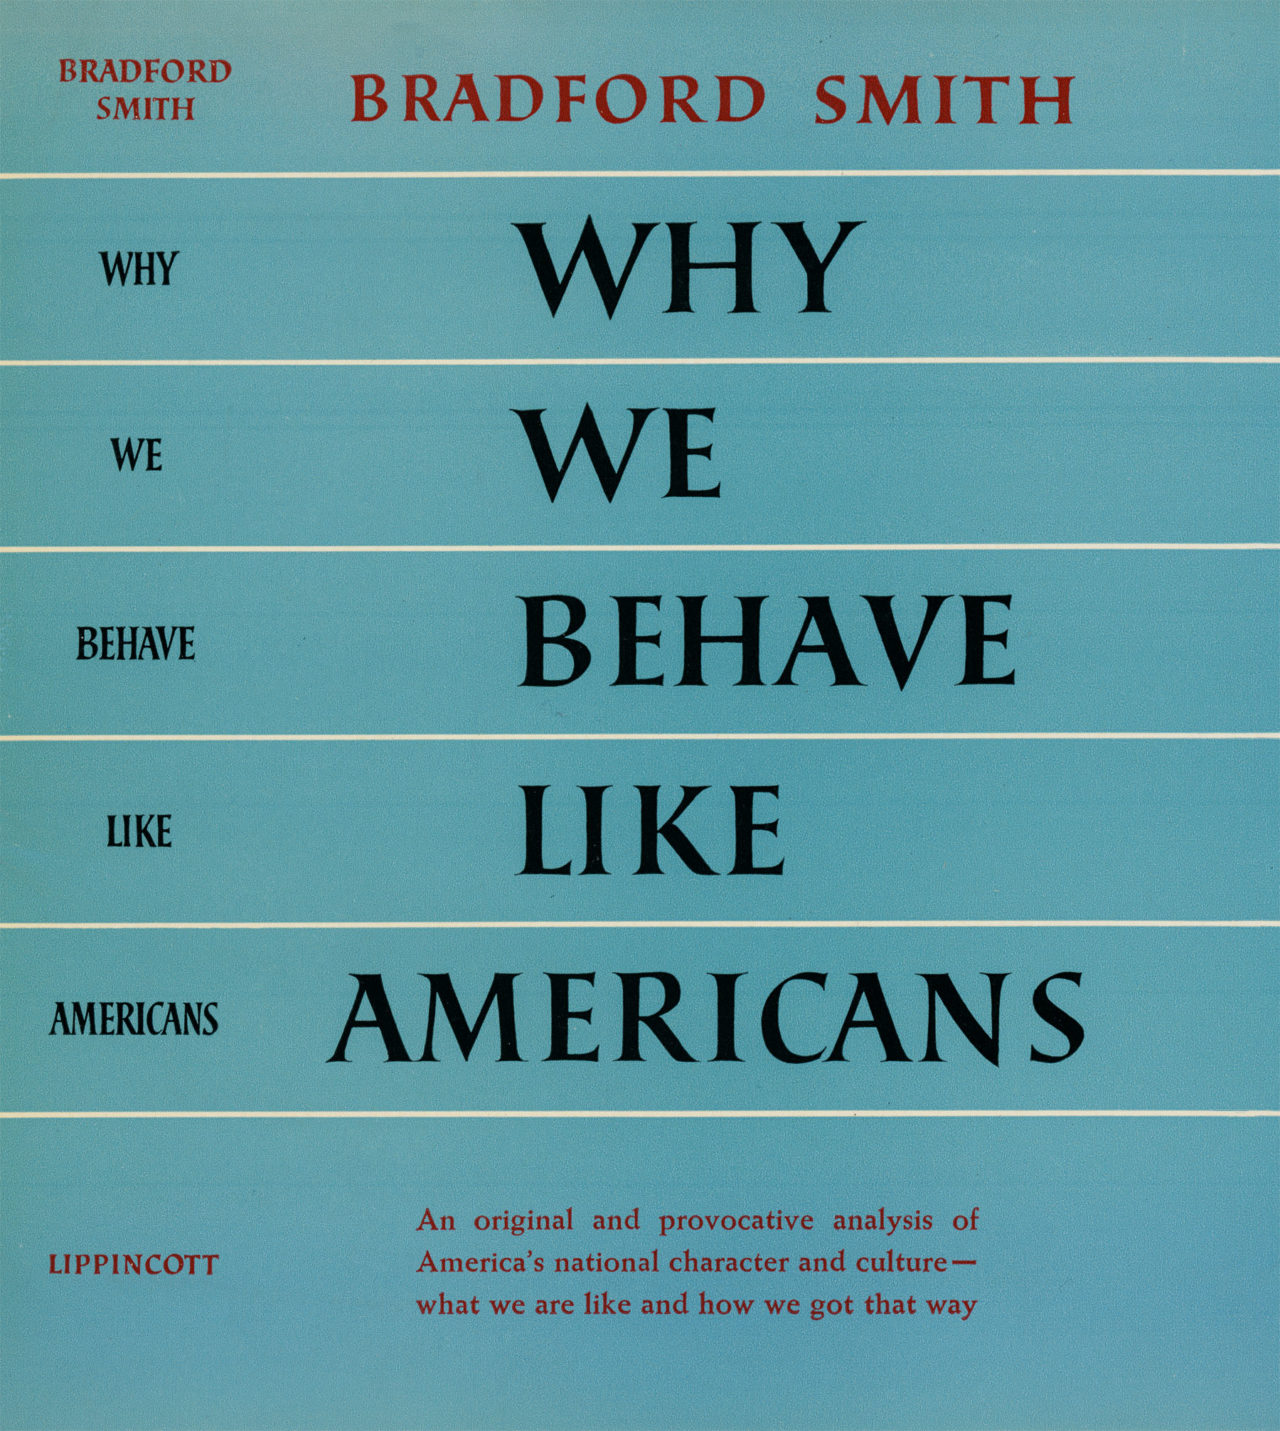 Why We Behave Like Americans